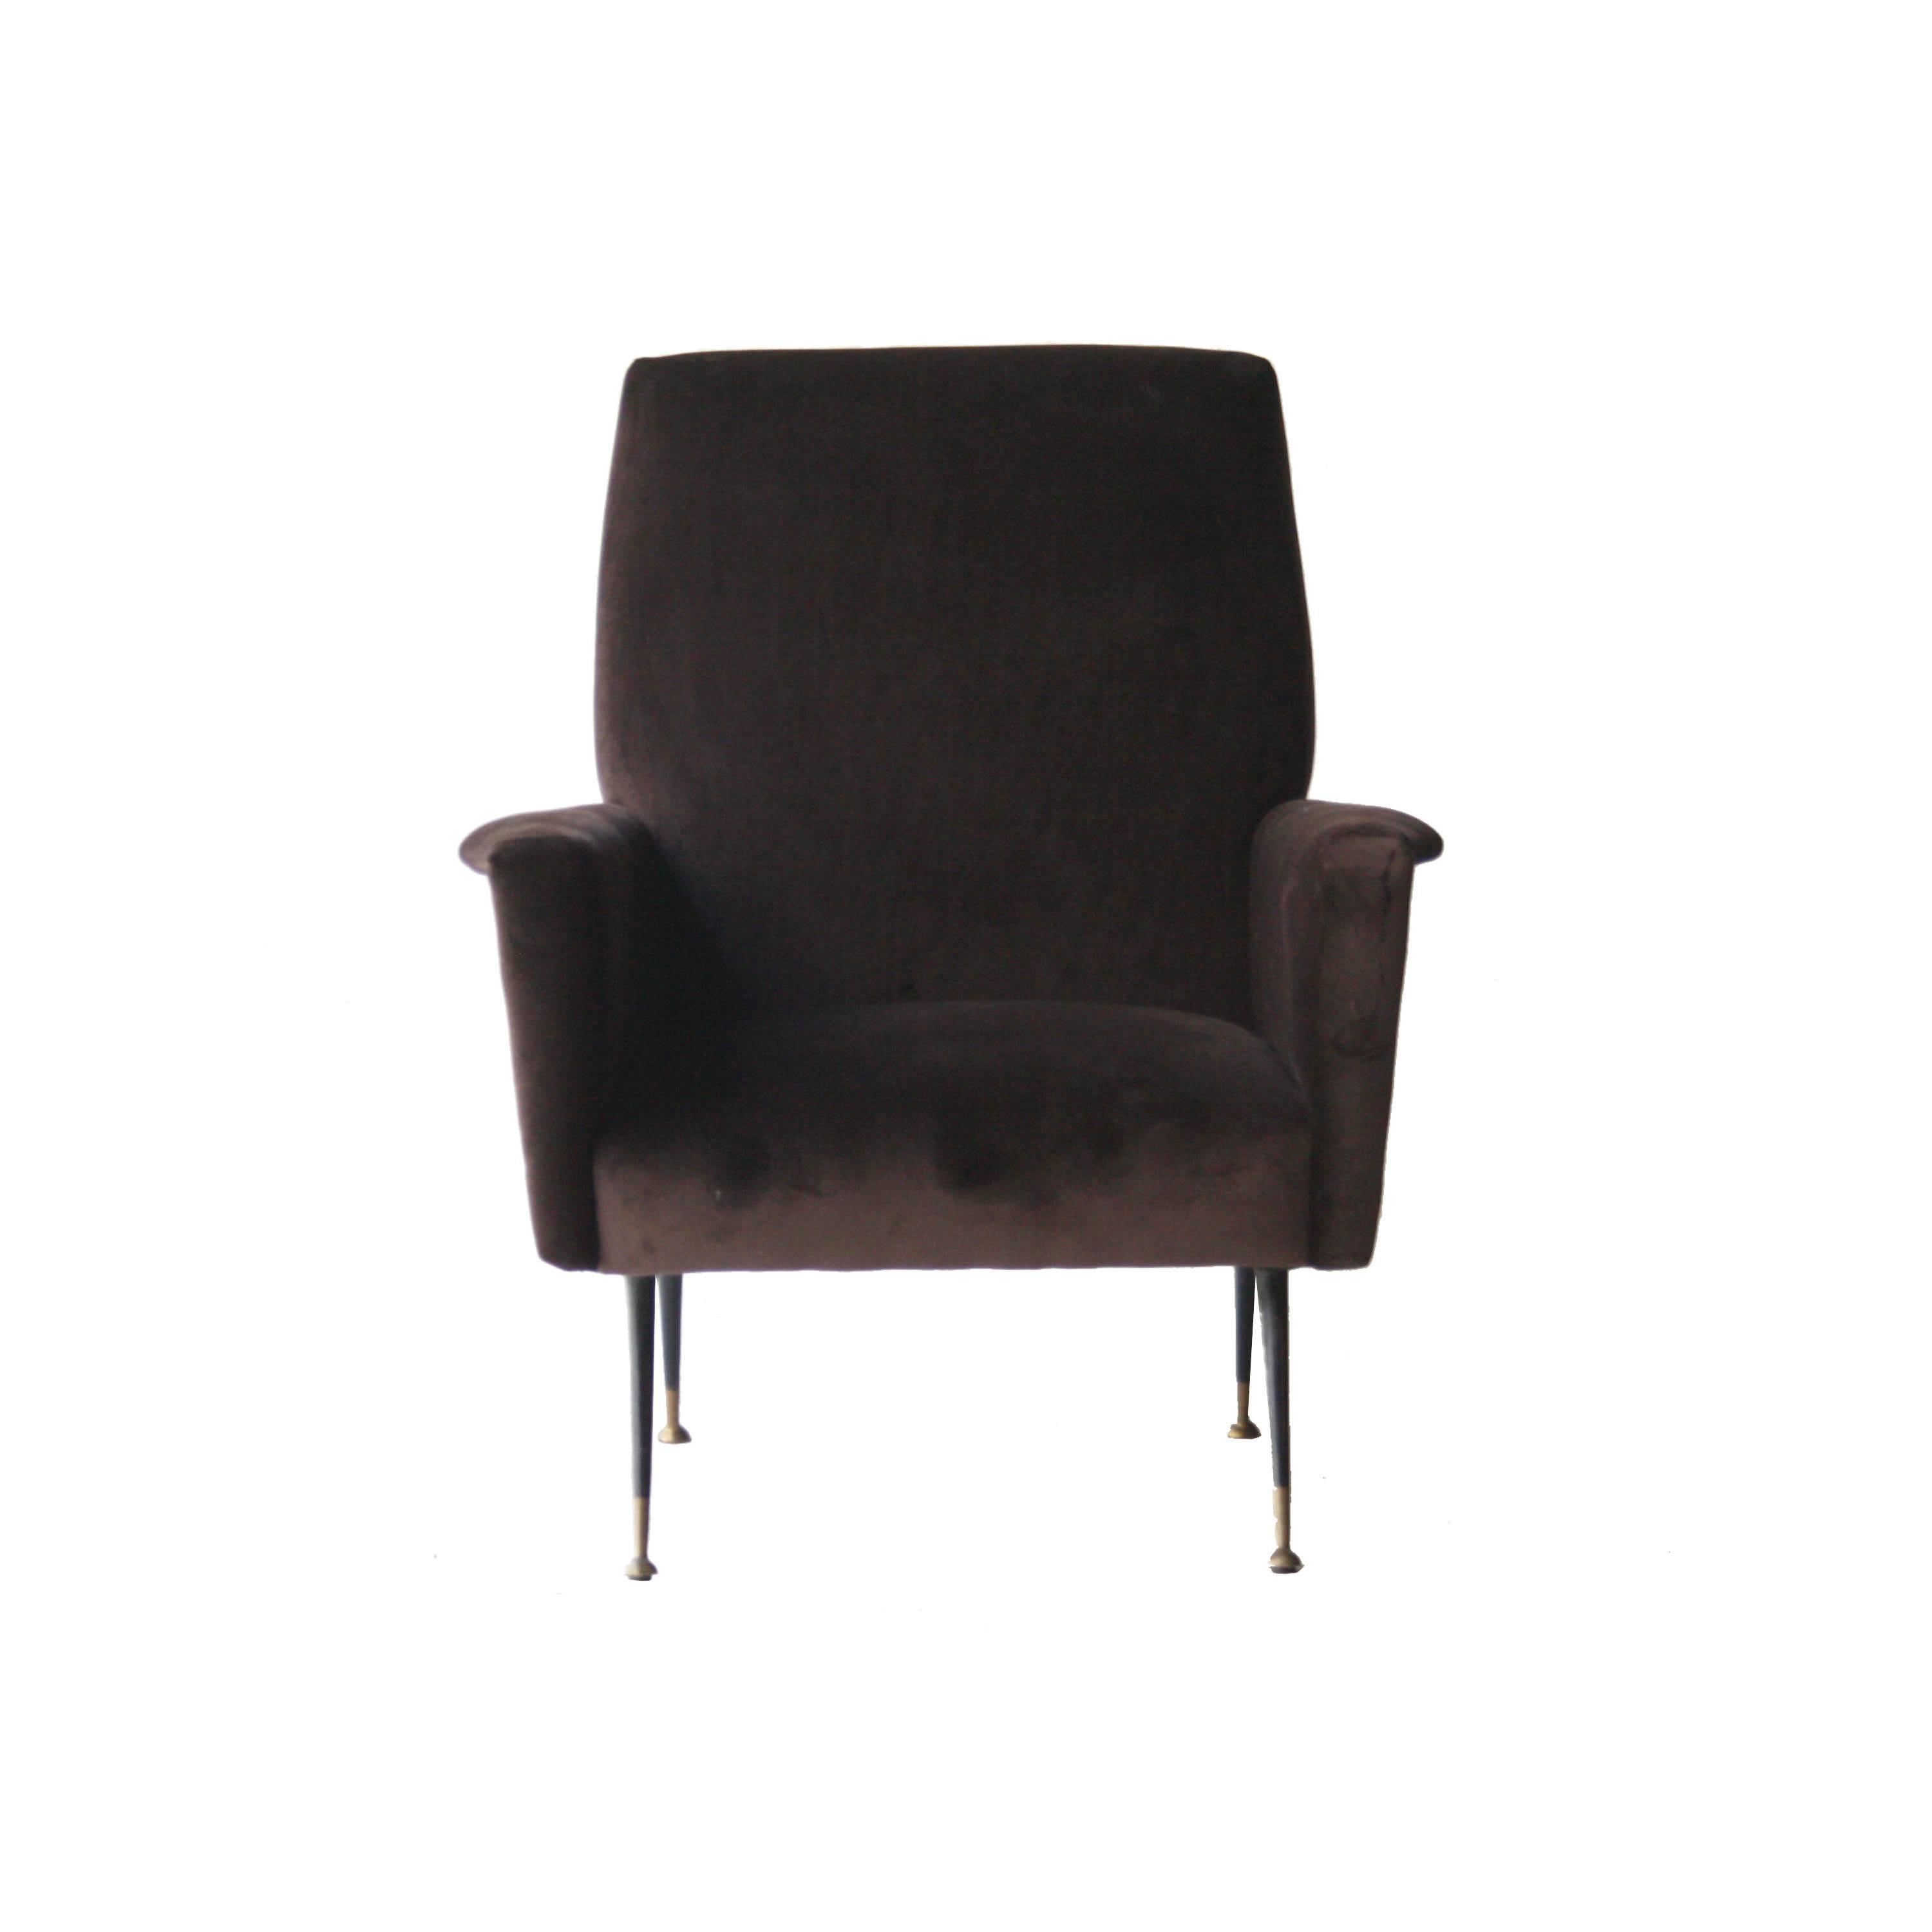 Armchair with solid wood structure with metallic legs lacquered in black finished in brass. Upholstered in brown cotton velvet.